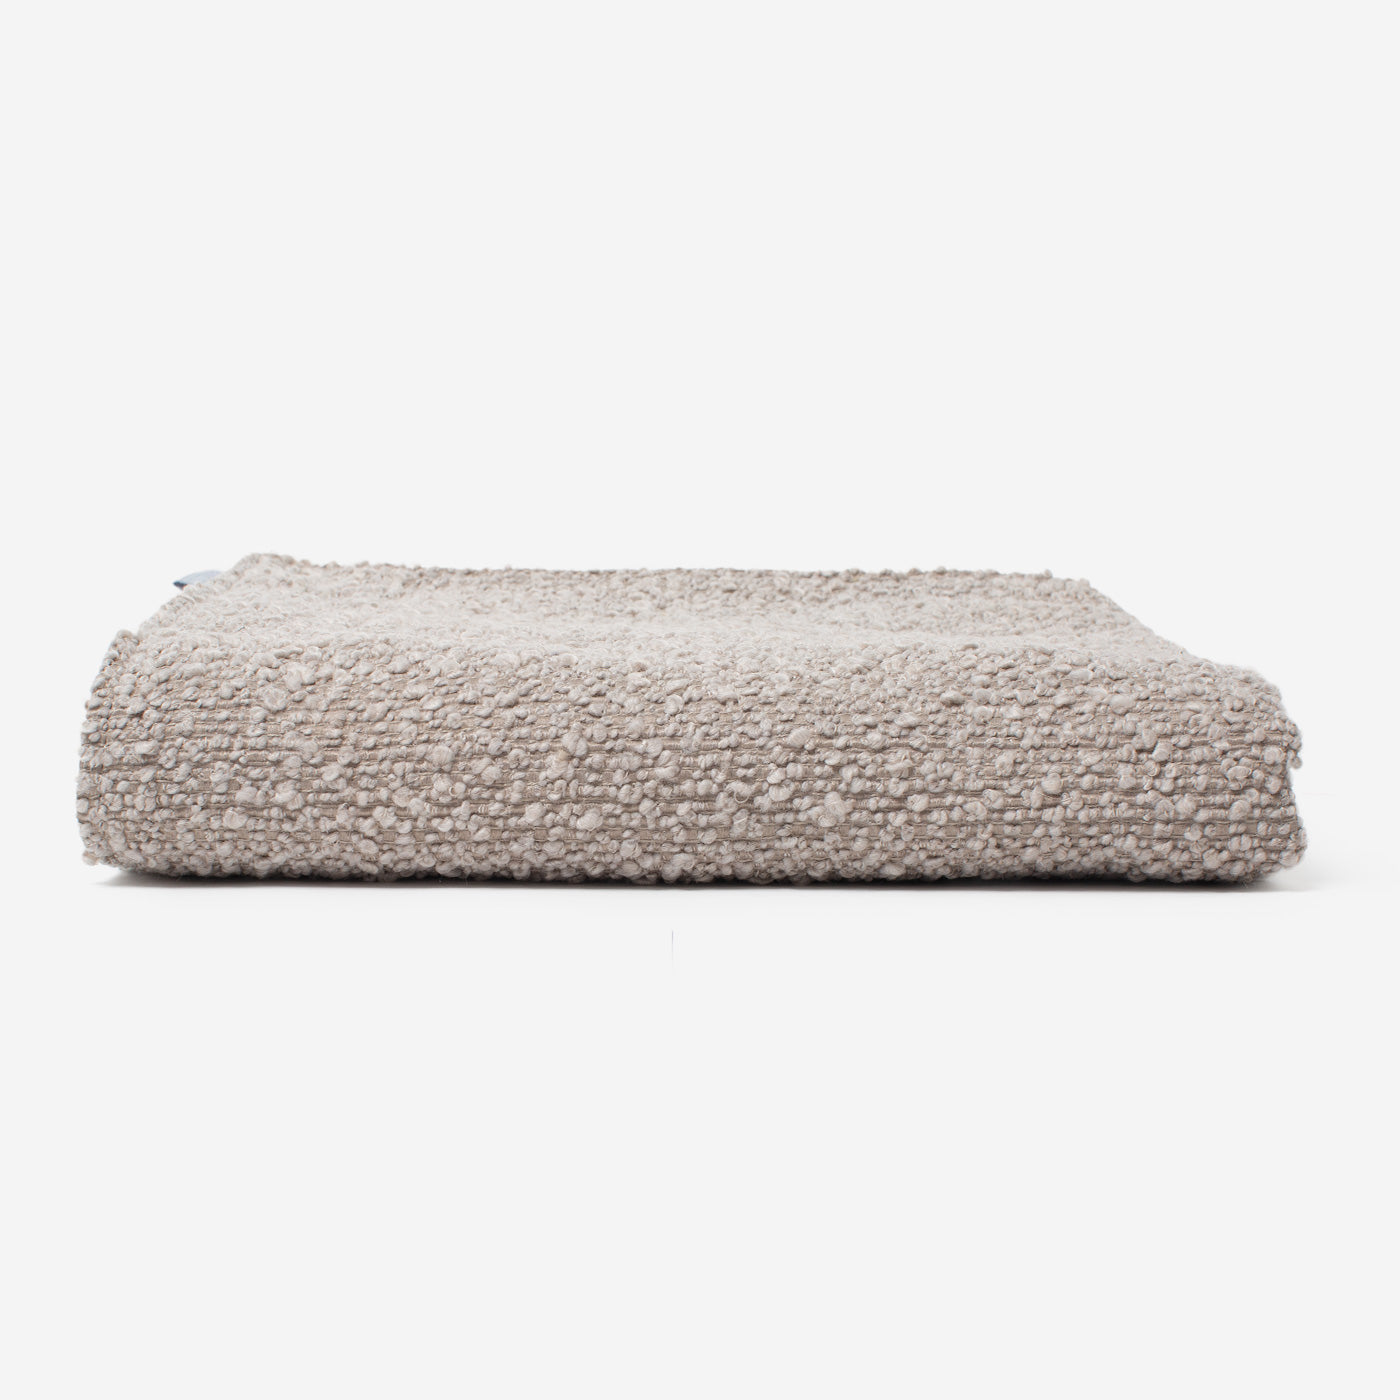 [color:Mink Boucle] Super Soft Sherpa & Teddy Fleece Lining, Our Luxury Cat & Kitten Blanket In Stunning Boucle I The Perfect Cat Bed Accessory! Available Now at Lords & Labradors US